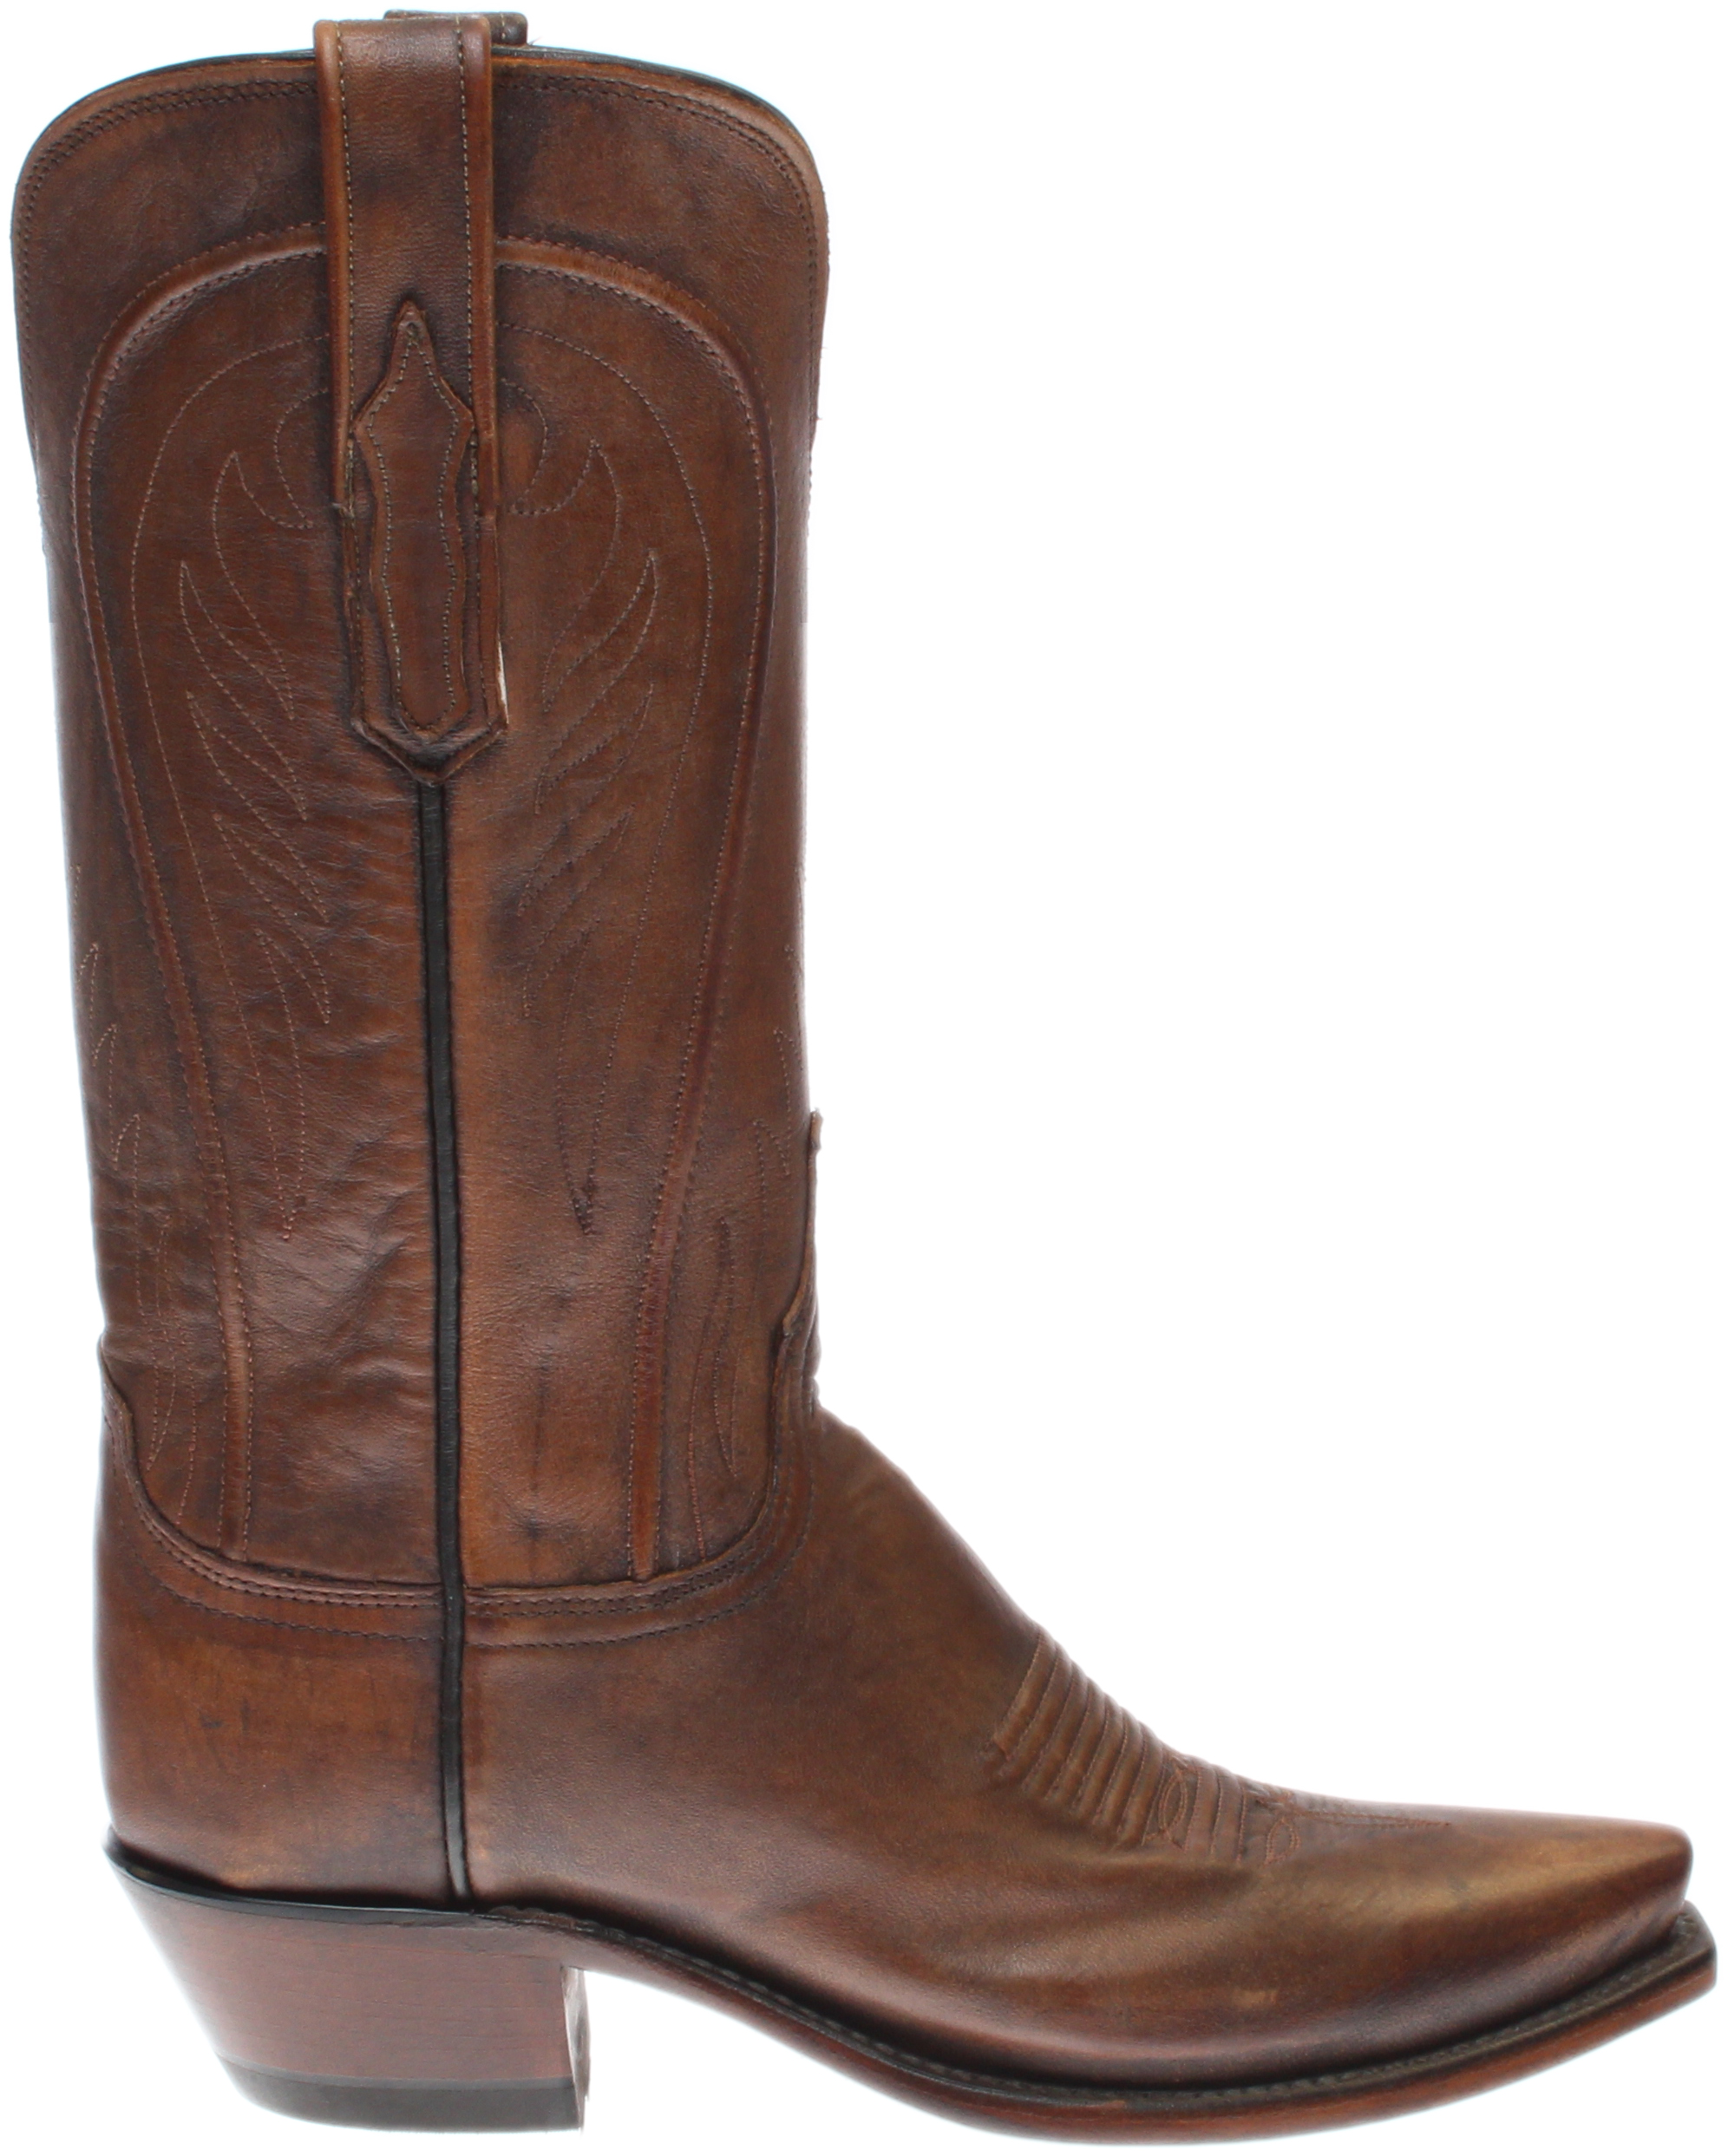 Lucchese Willa Mad Dog Goat Leather Boots